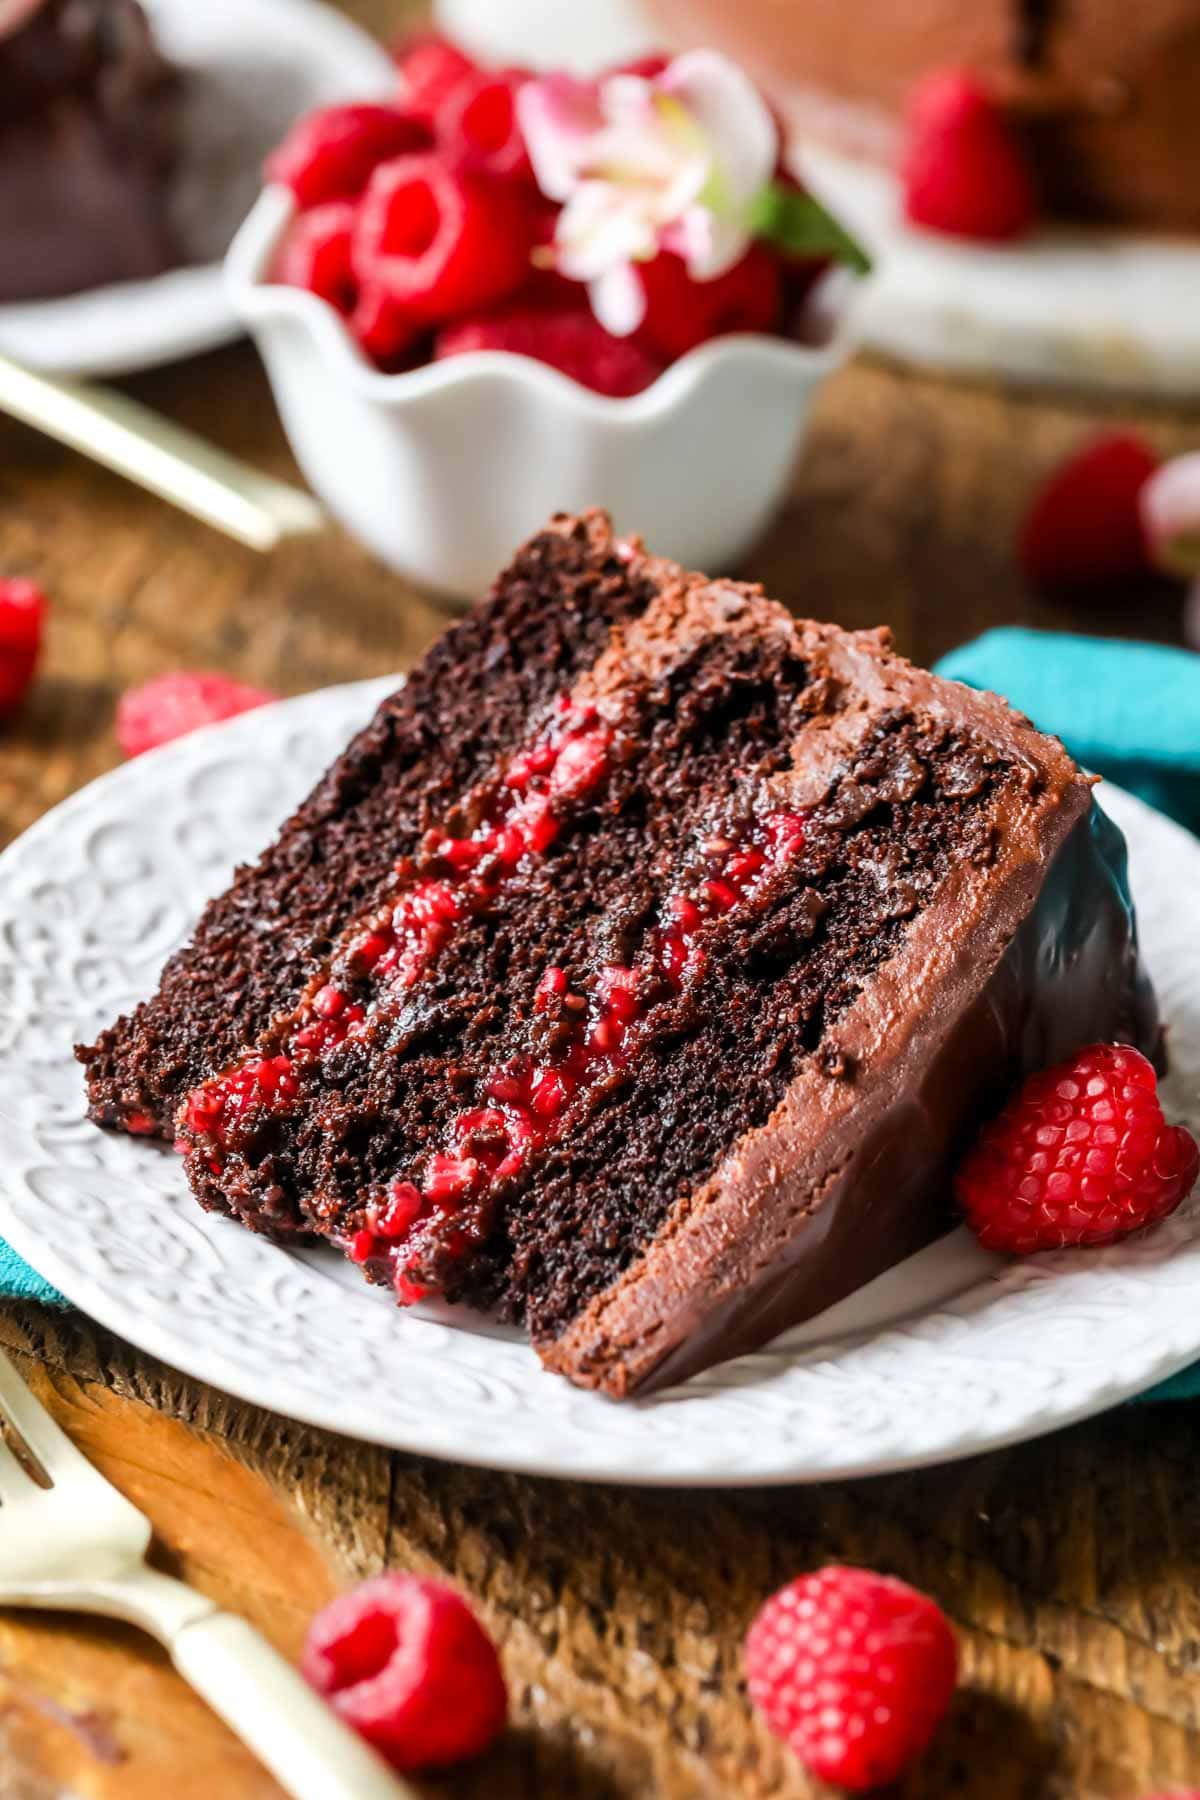 Slice of chocolate raspberry cake made with a raspberry filling and chocolate ganache topping.